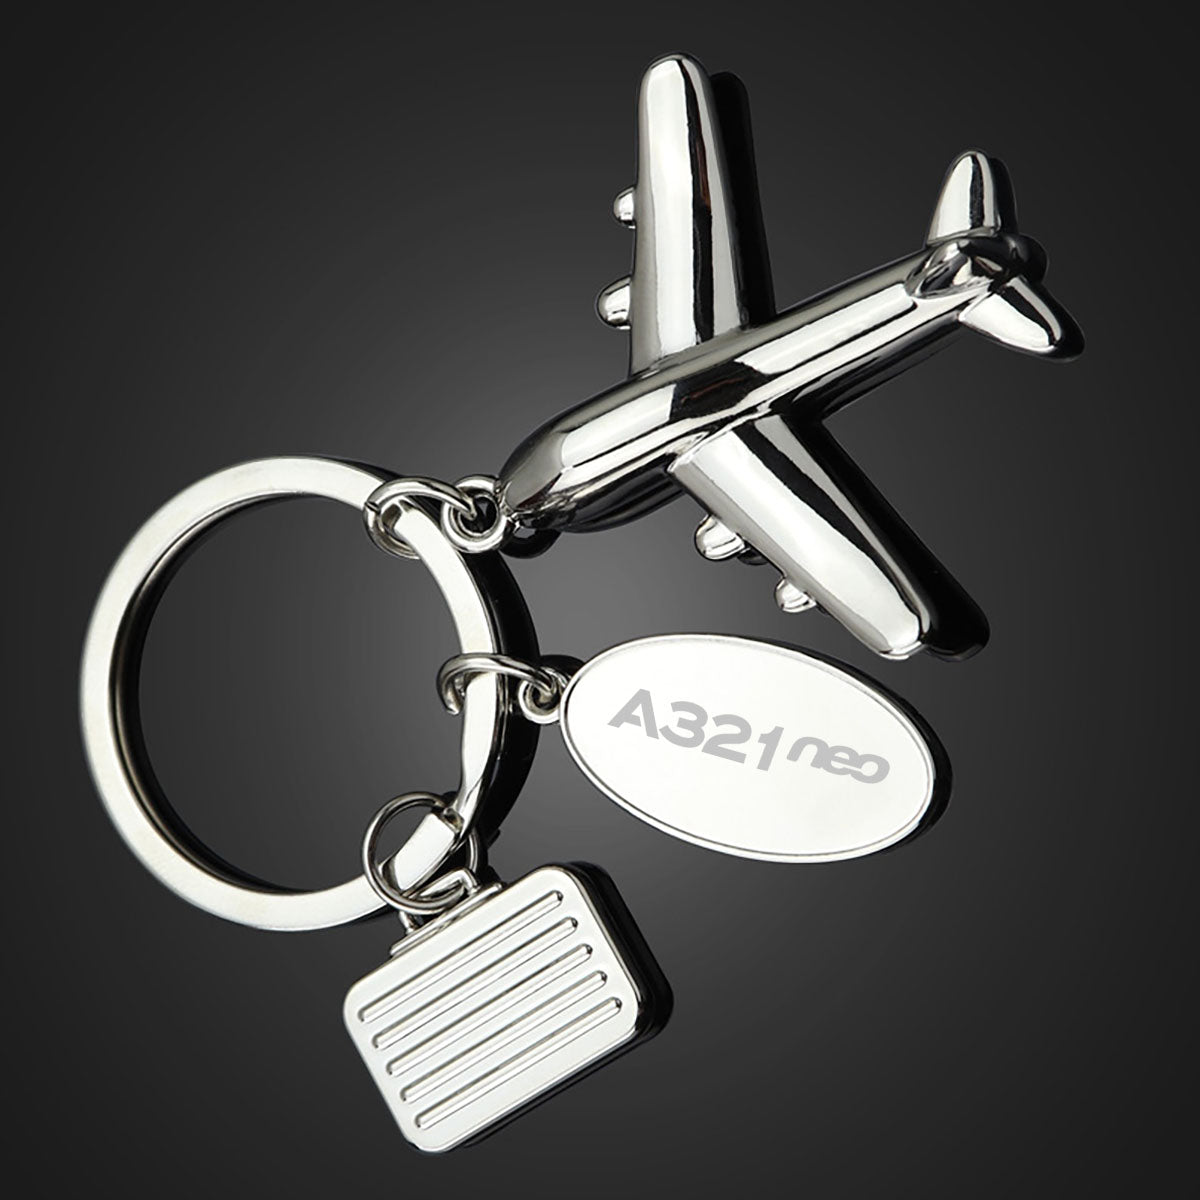 A321neo & Text Designed Suitcase Airplane Key Chains